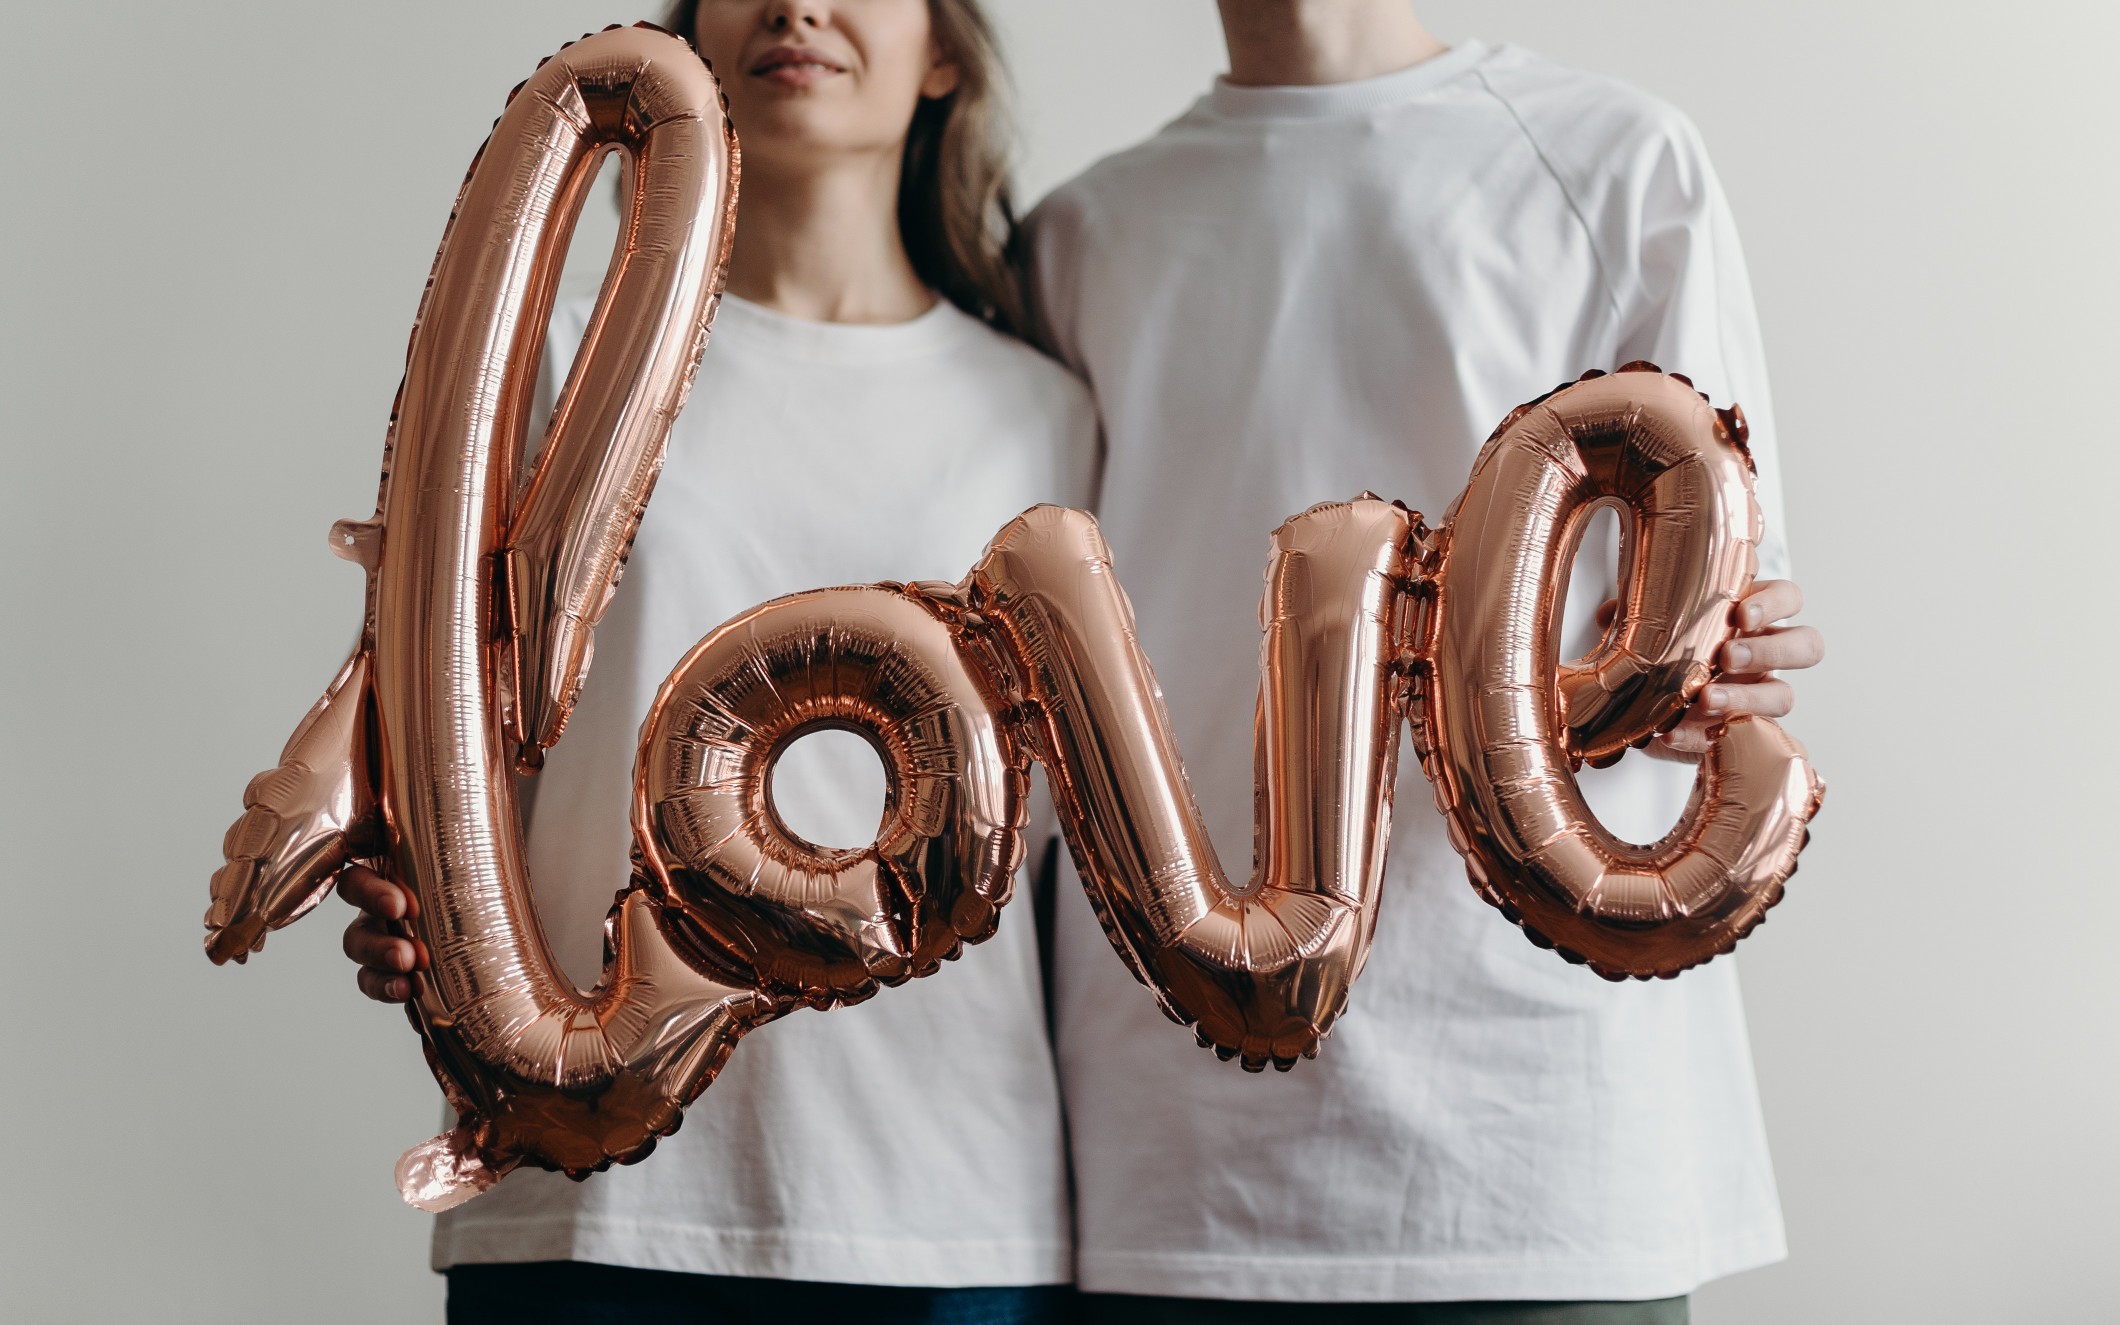 A woman on the left and a man on the right are holding a balloon that reads "love"